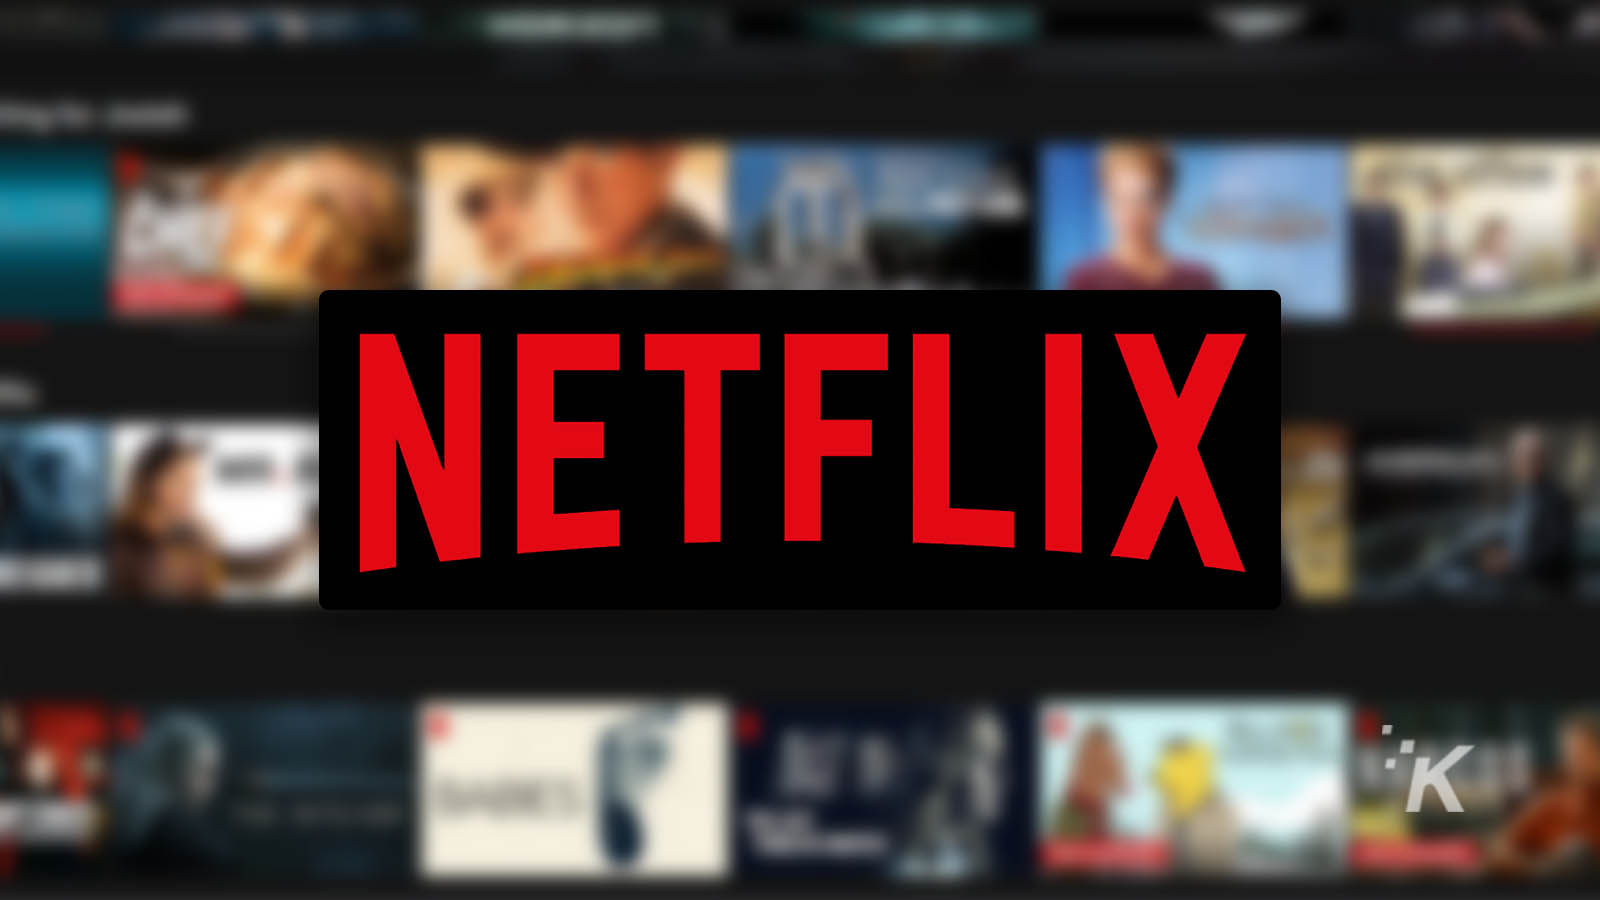 Netflix's Over-Reliance on Streaming